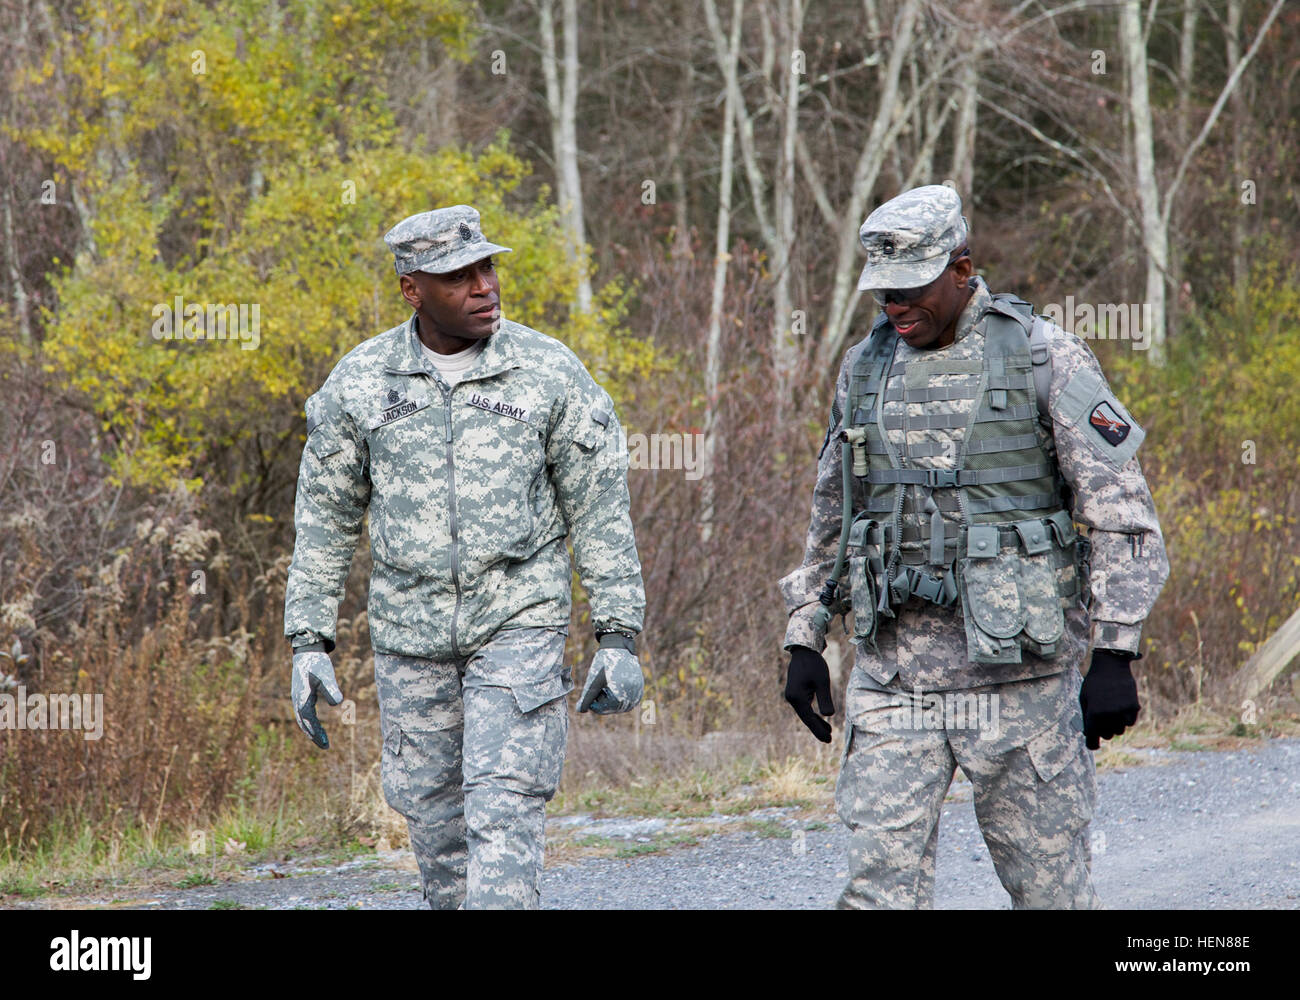 U.S. Army Command Sgt. Maj. James Jackson (left), command sergeant major of 114th Signal Battalion and Sgt. 1st Class Rufus Smith, attached to 55th Signal Company (Combat Camera), walk and talk together during a tactical field training exercise (FTX) at the Ft. Indiantown Gap National Guard Training Center, Annville, Pa., Nov. 5, 2013. The FTX is conducted quarterly to bring soldiers together and practice tactical training from the Army Mission Essential Task List as a battalion. (U.S. Army photo by Sgt. Evangelia Grigiss/Released) 114th Signal Battalion field training exercise 131105-A-LQ527- Stock Photo